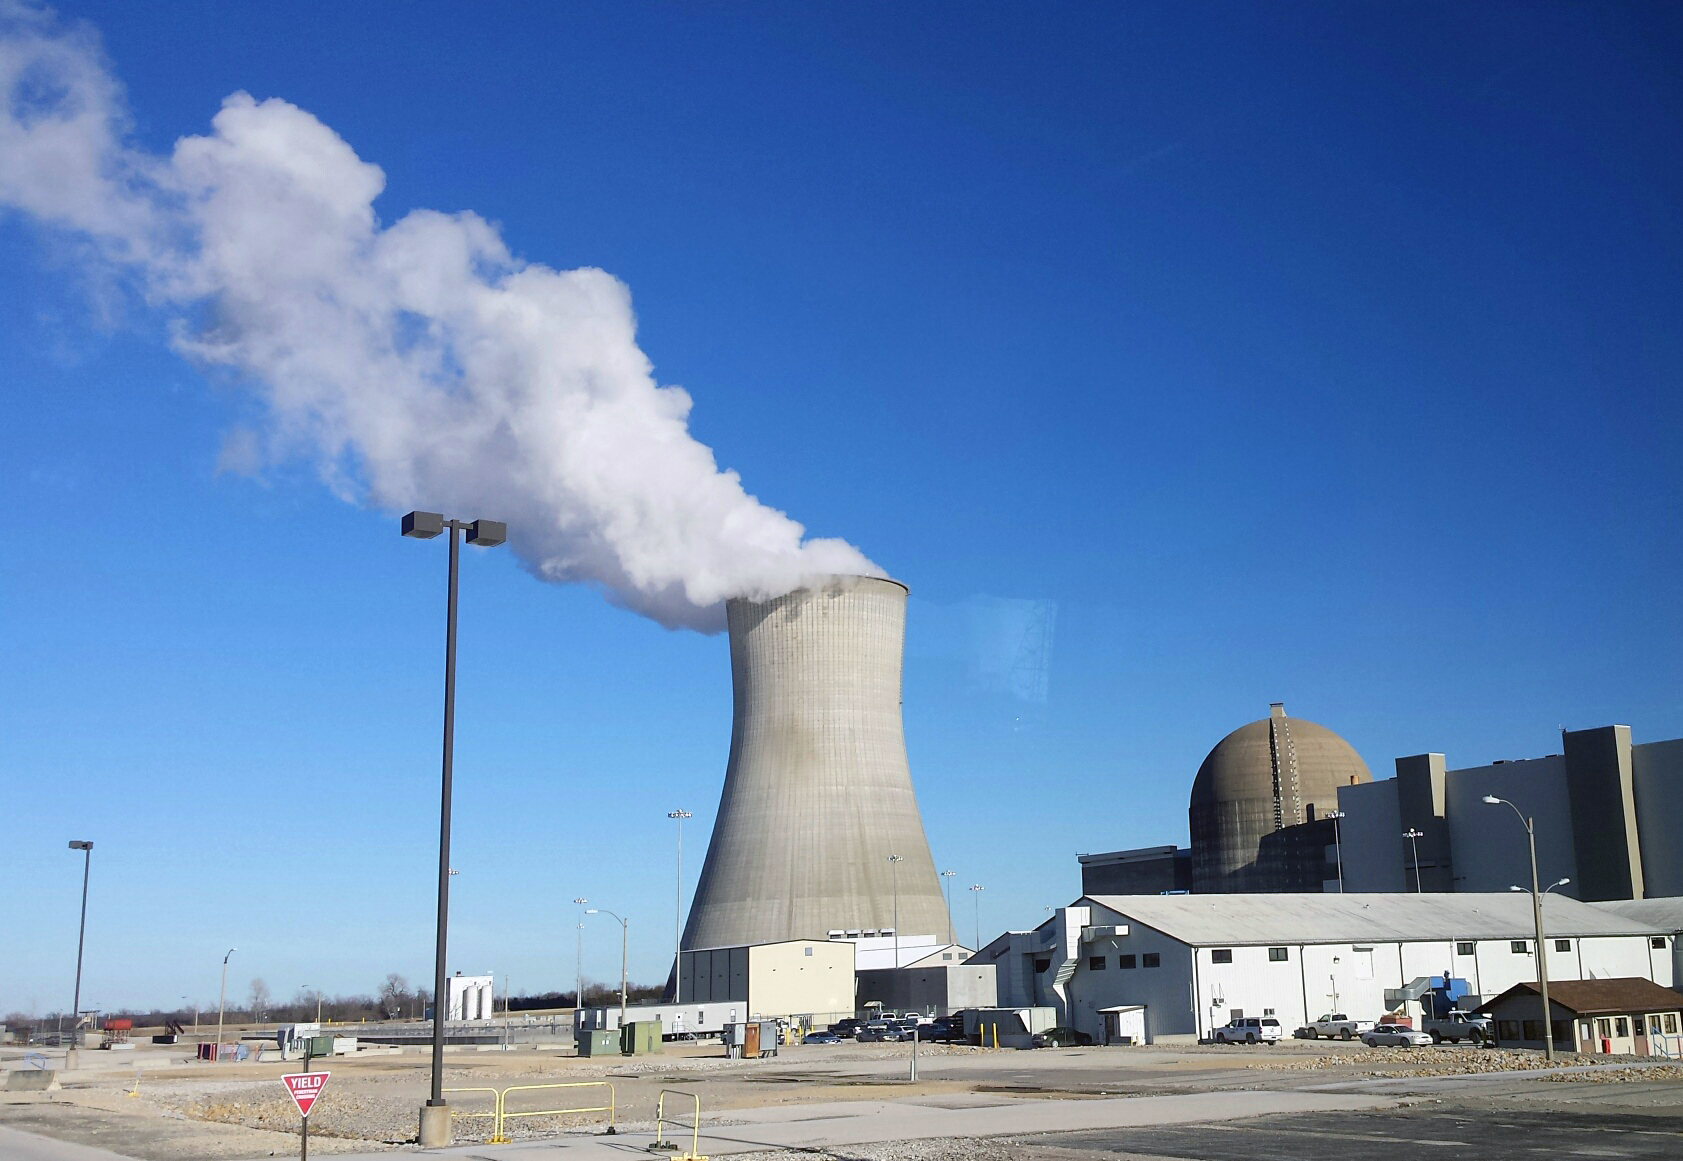 Lawmakers May Lift Nuclear Moratorium, But Path To New Plants Remains Unclear